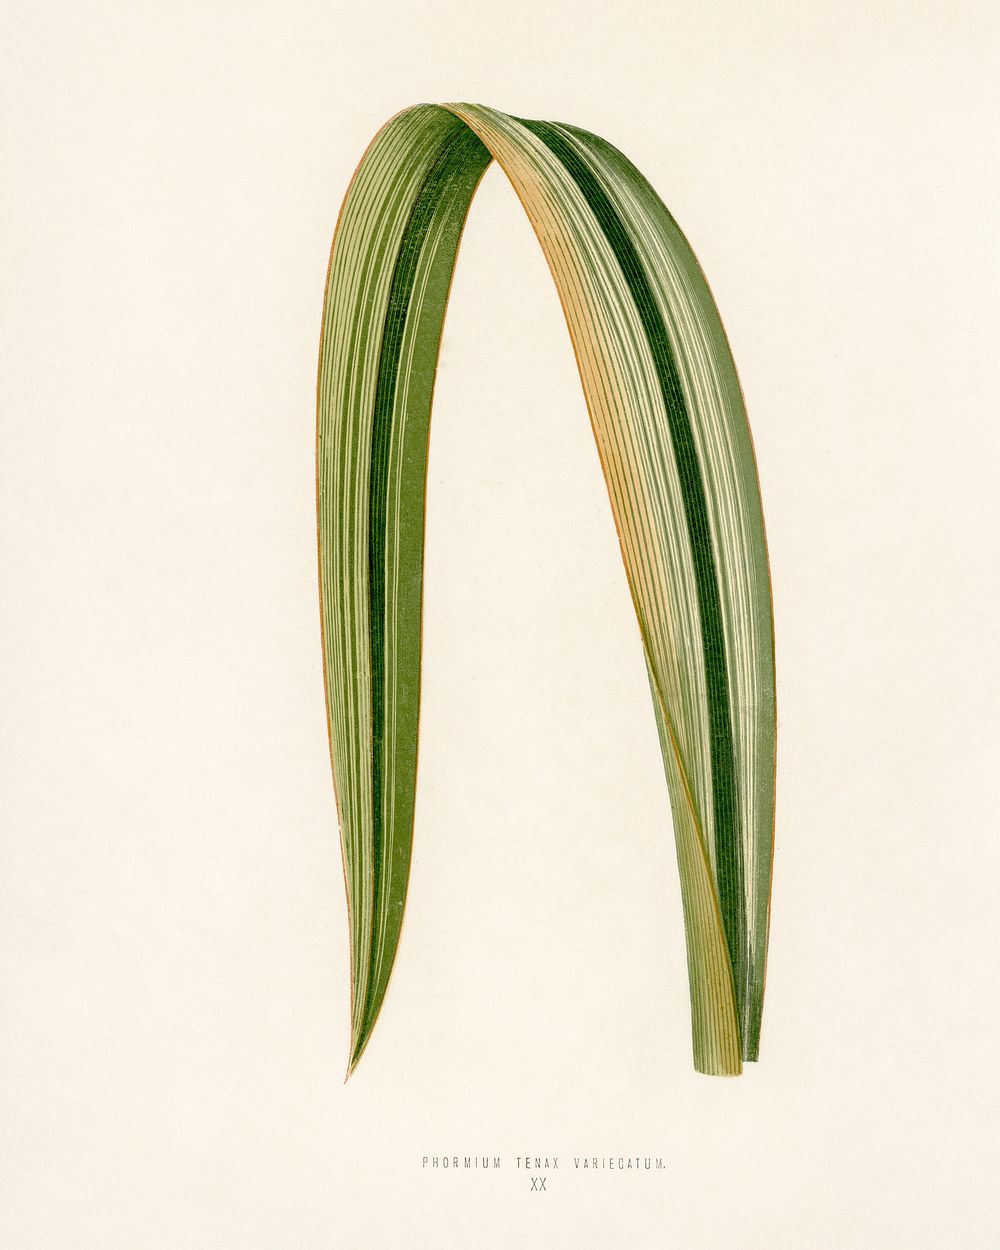 Variegated New Zealand Flax (Phormium Tenax Variegatum). Digitally enhanced from our own 1929 edition of New and Rare…